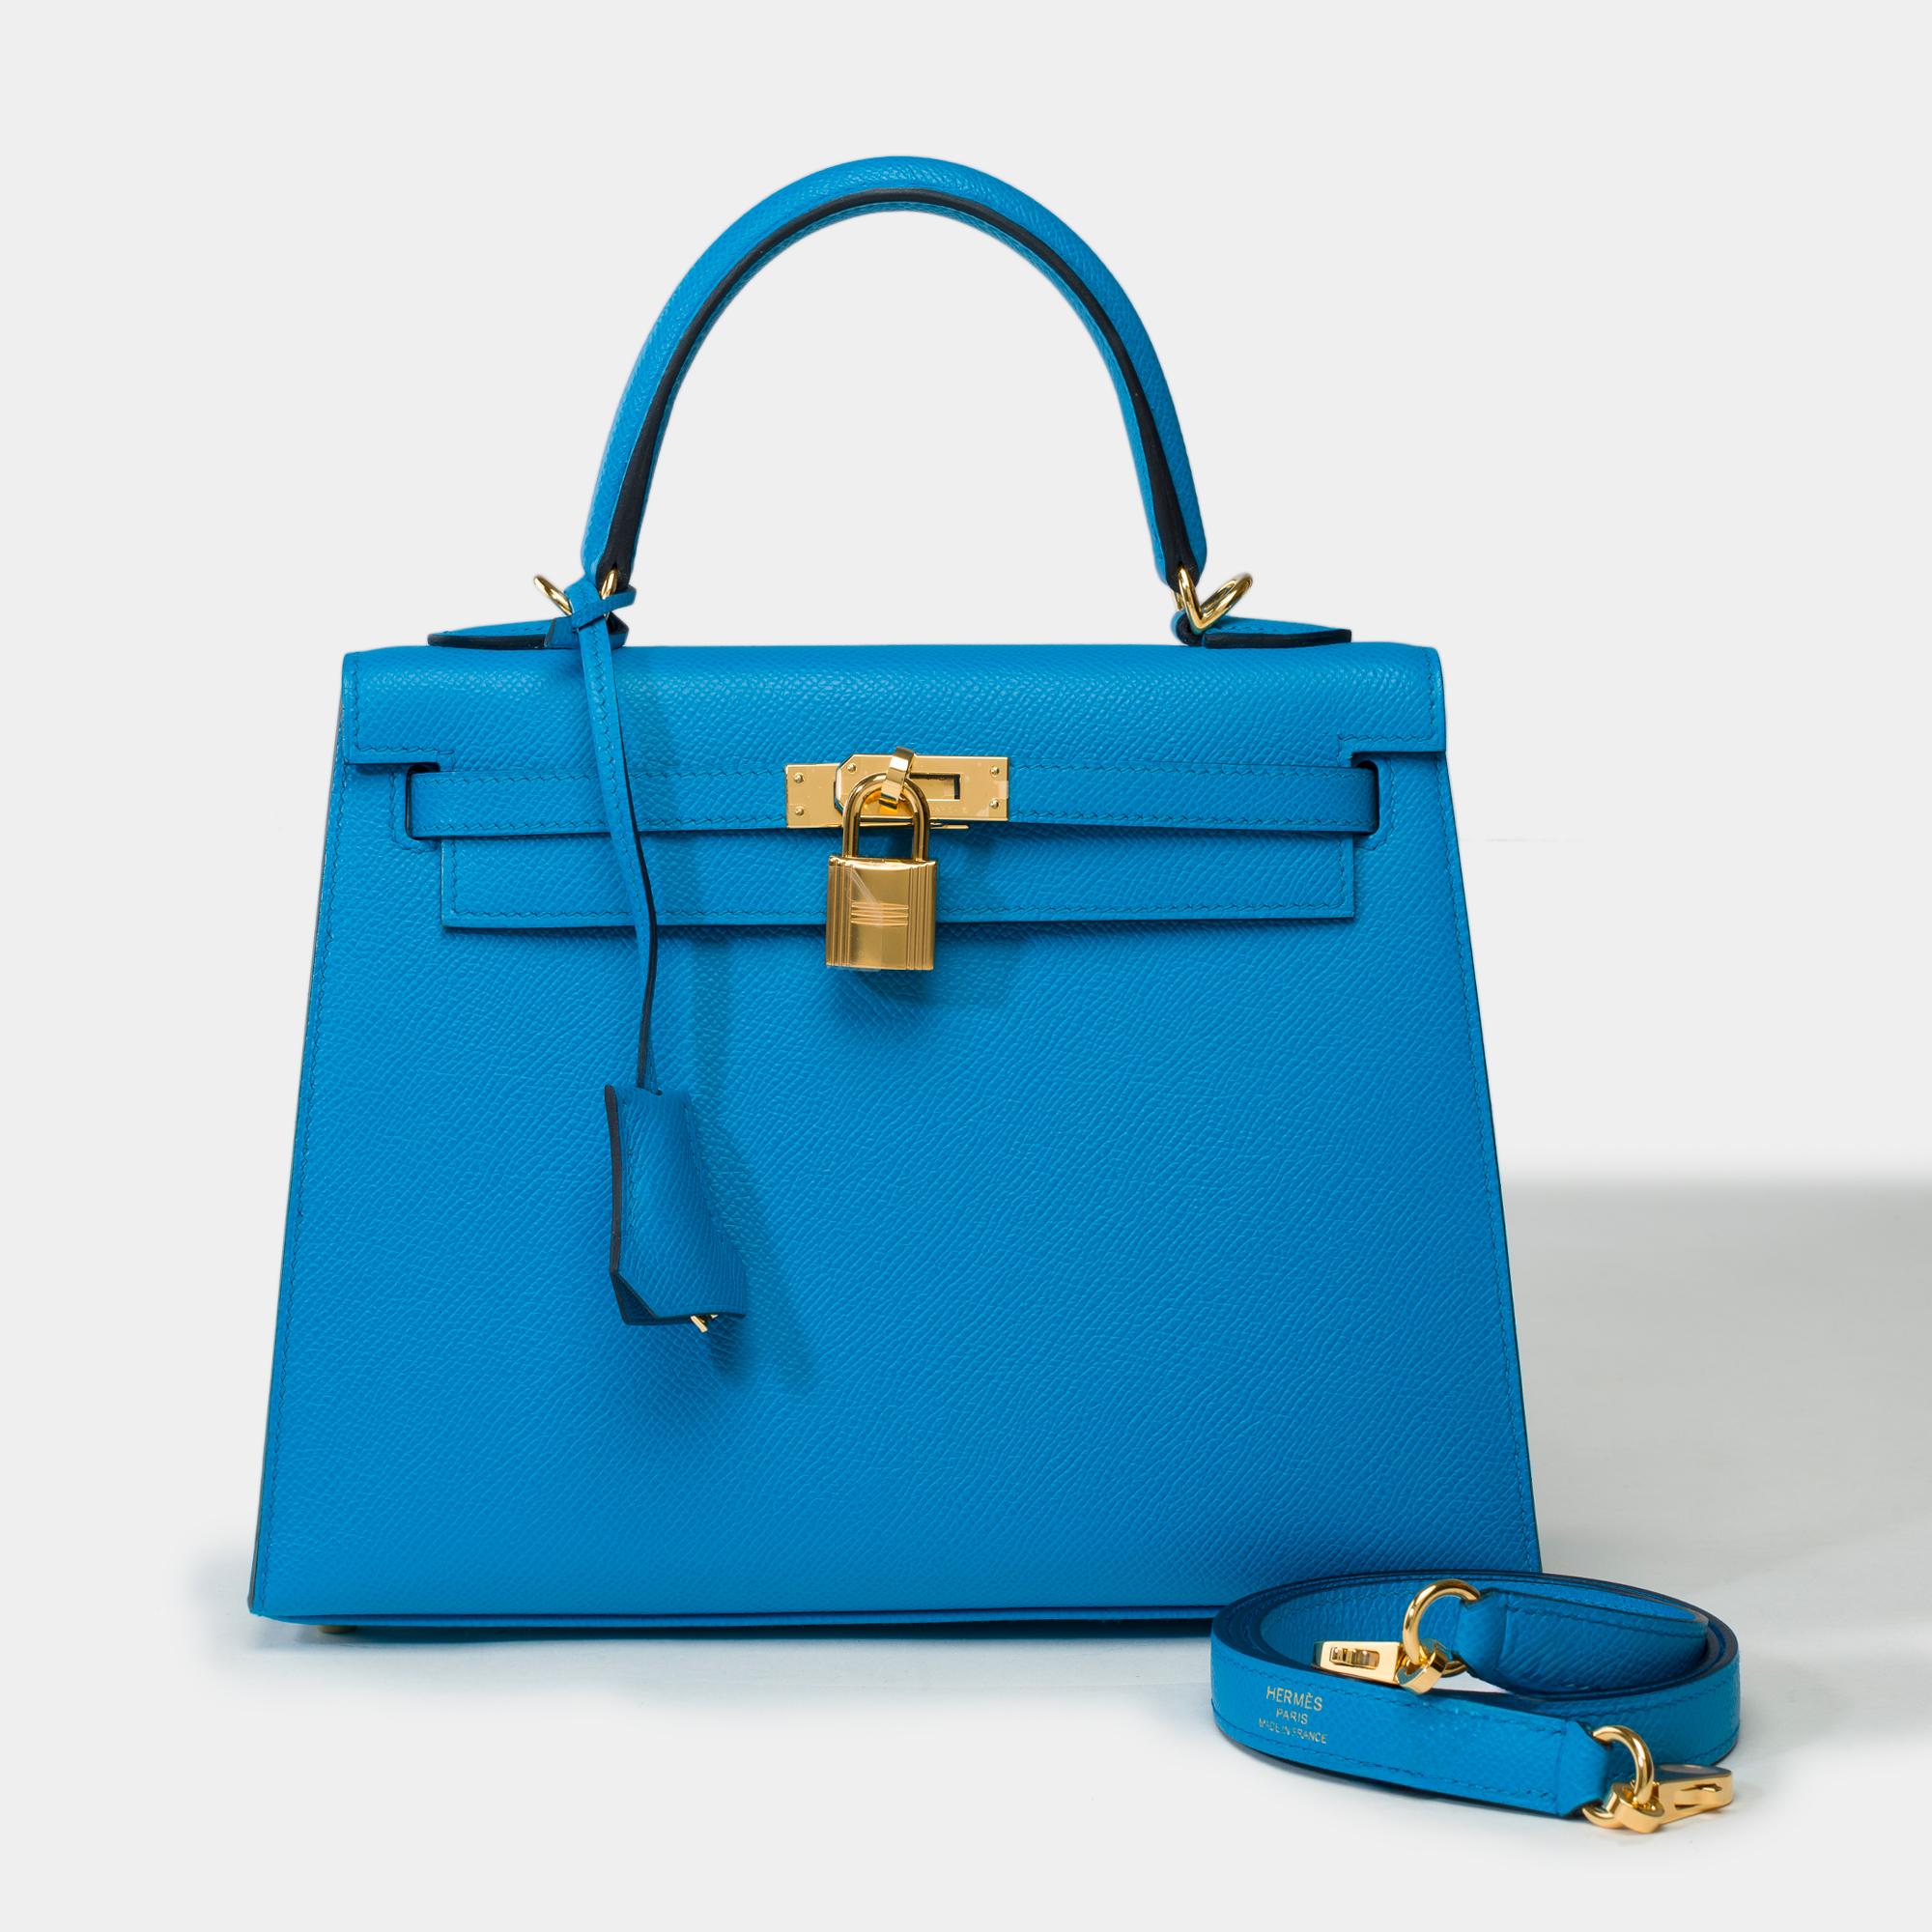 Beautiful Hermes Kelly 25 sellier handbag strap in Blue Frida Epsom calf leather, gold plated metal trim, simple handle in blue epsom leather, a removable shoulder strap in blue epsom leather allowing a hand or shoulder carry

Flap closure
Inner